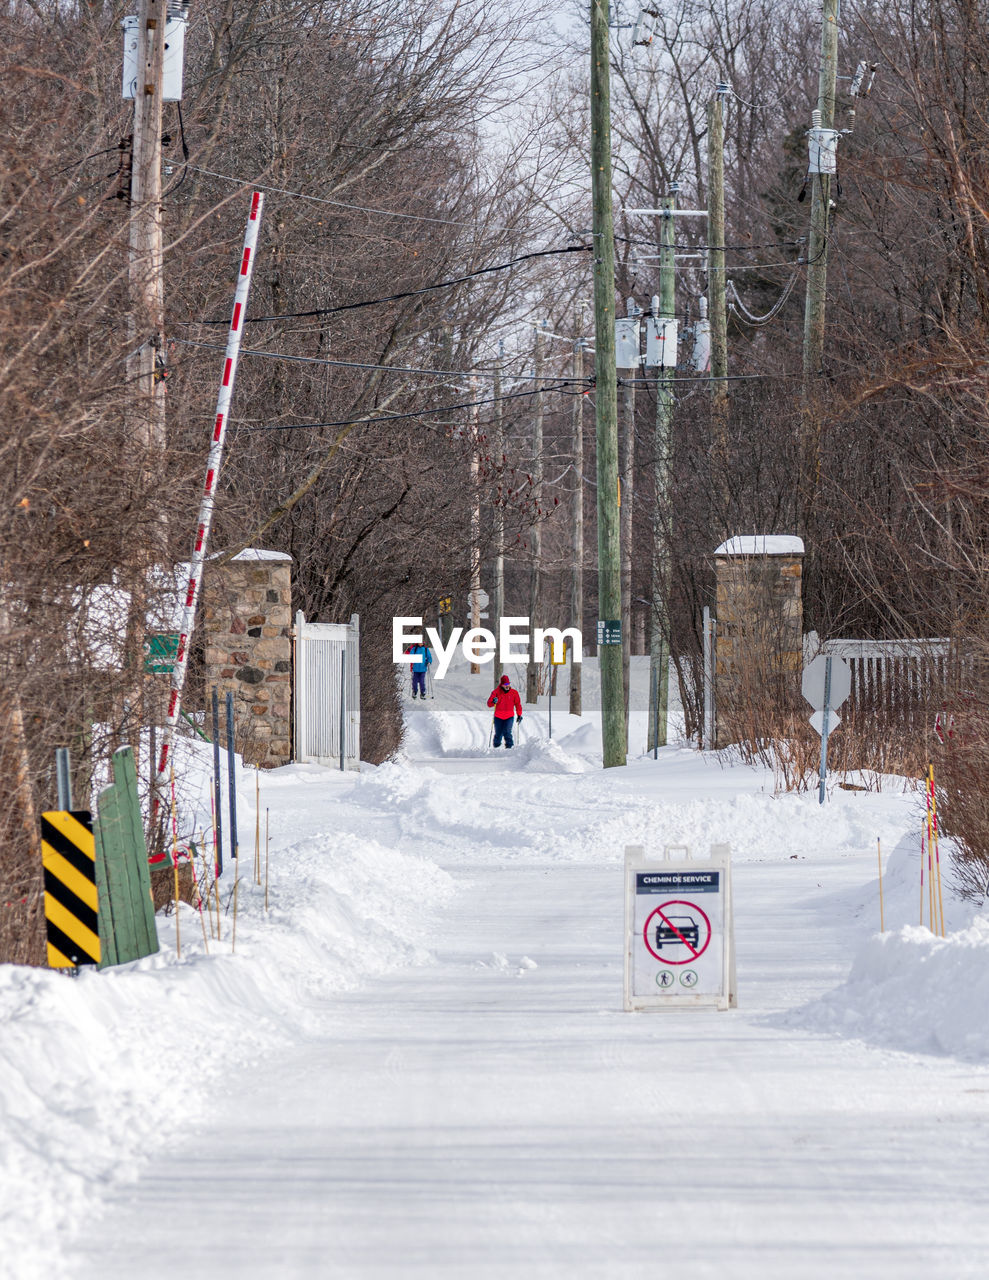 snow, winter, cold temperature, tree, bare tree, nature, plant, nordic skiing, skiing, day, architecture, white, sign, frozen, built structure, piste, outdoors, winter sports, road sign, transportation, communication, building exterior, land, road, ski, sports, city